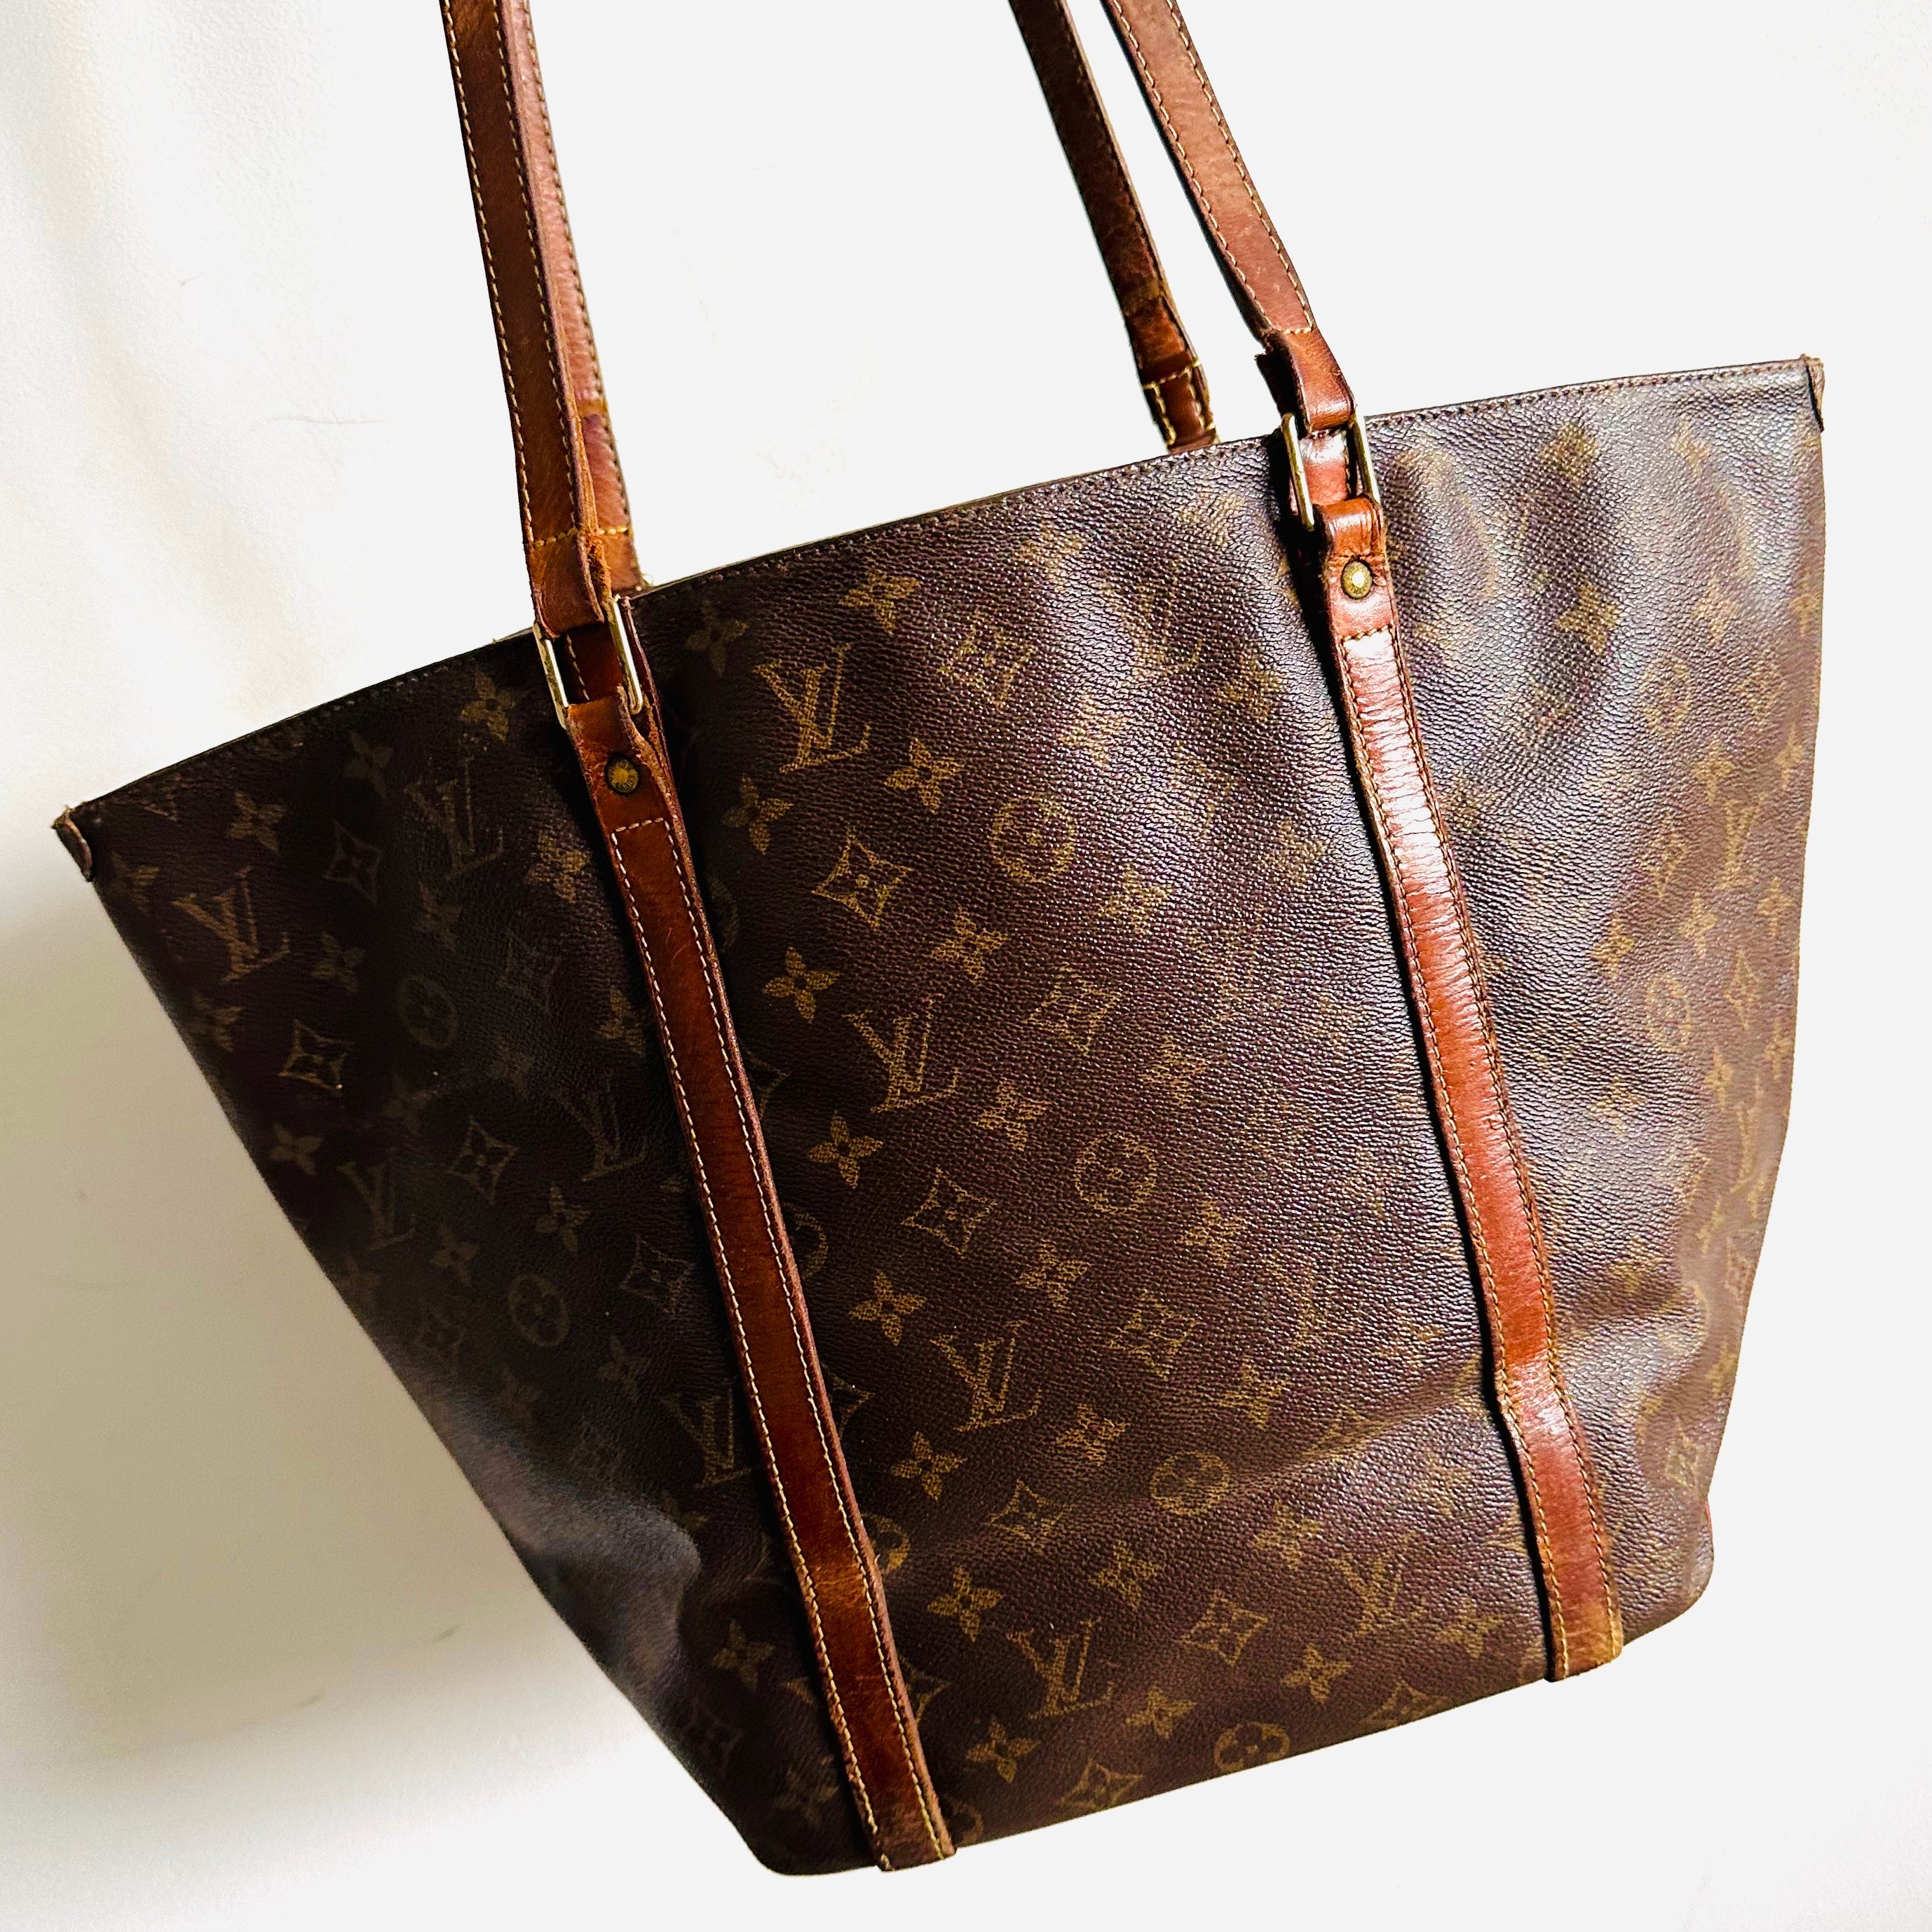 Louis Vuitton Sac Shopping Tote Bag Authenticated By Lxr